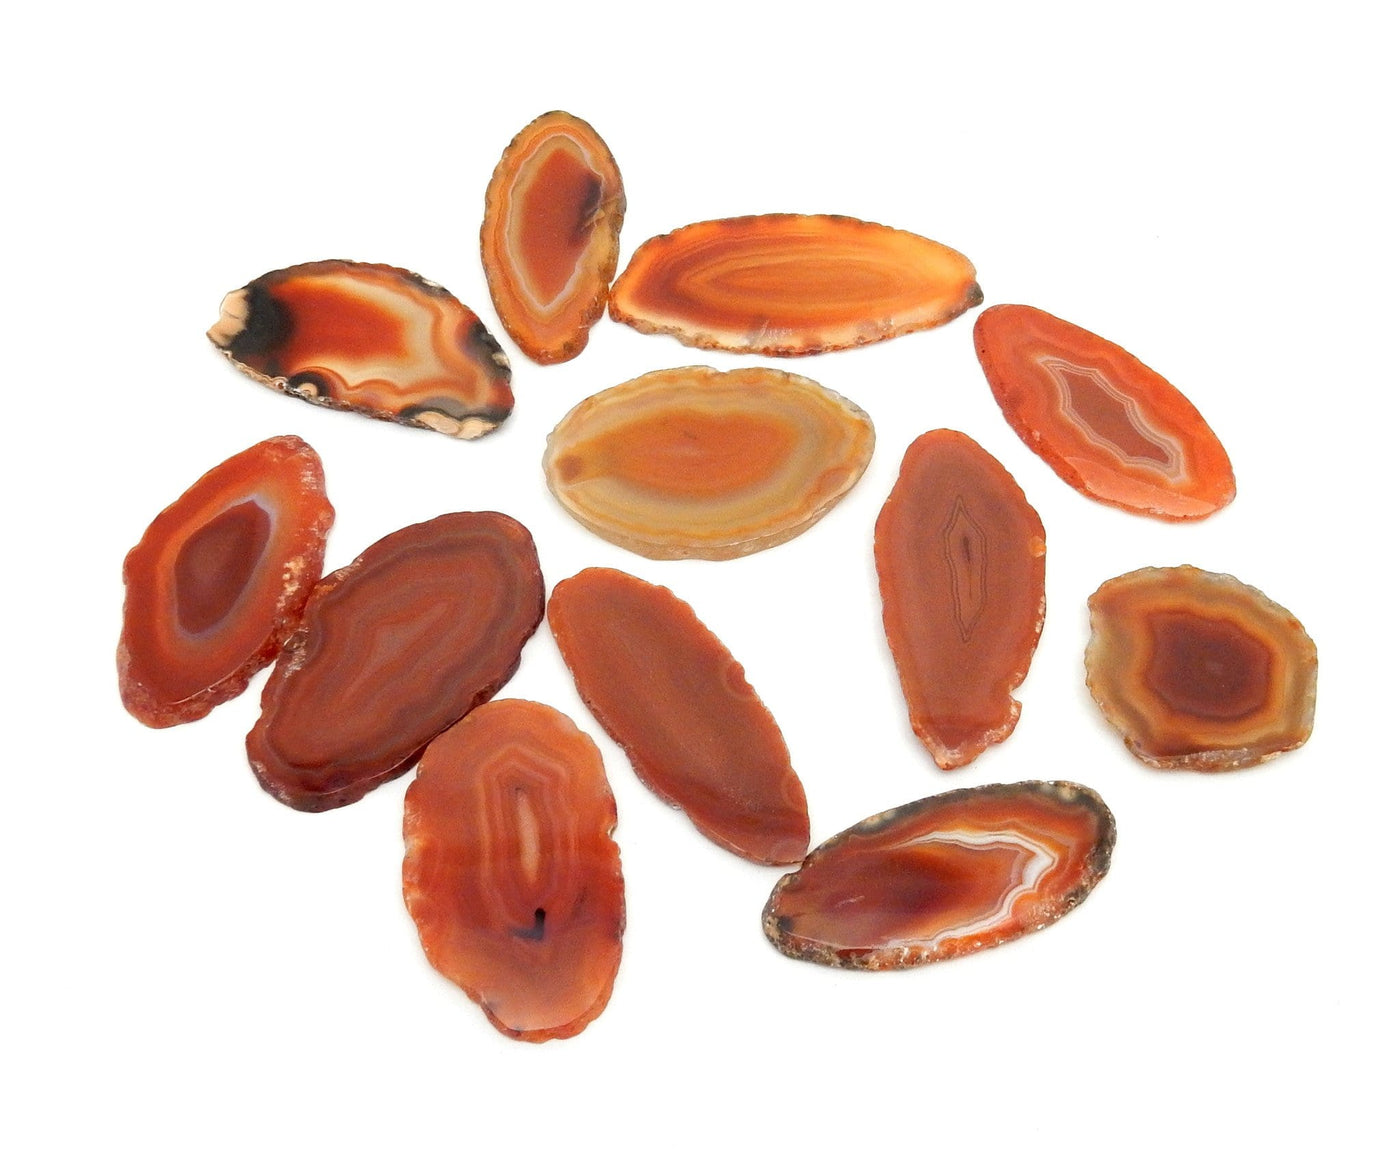 Red Agate Slices scattered on white background